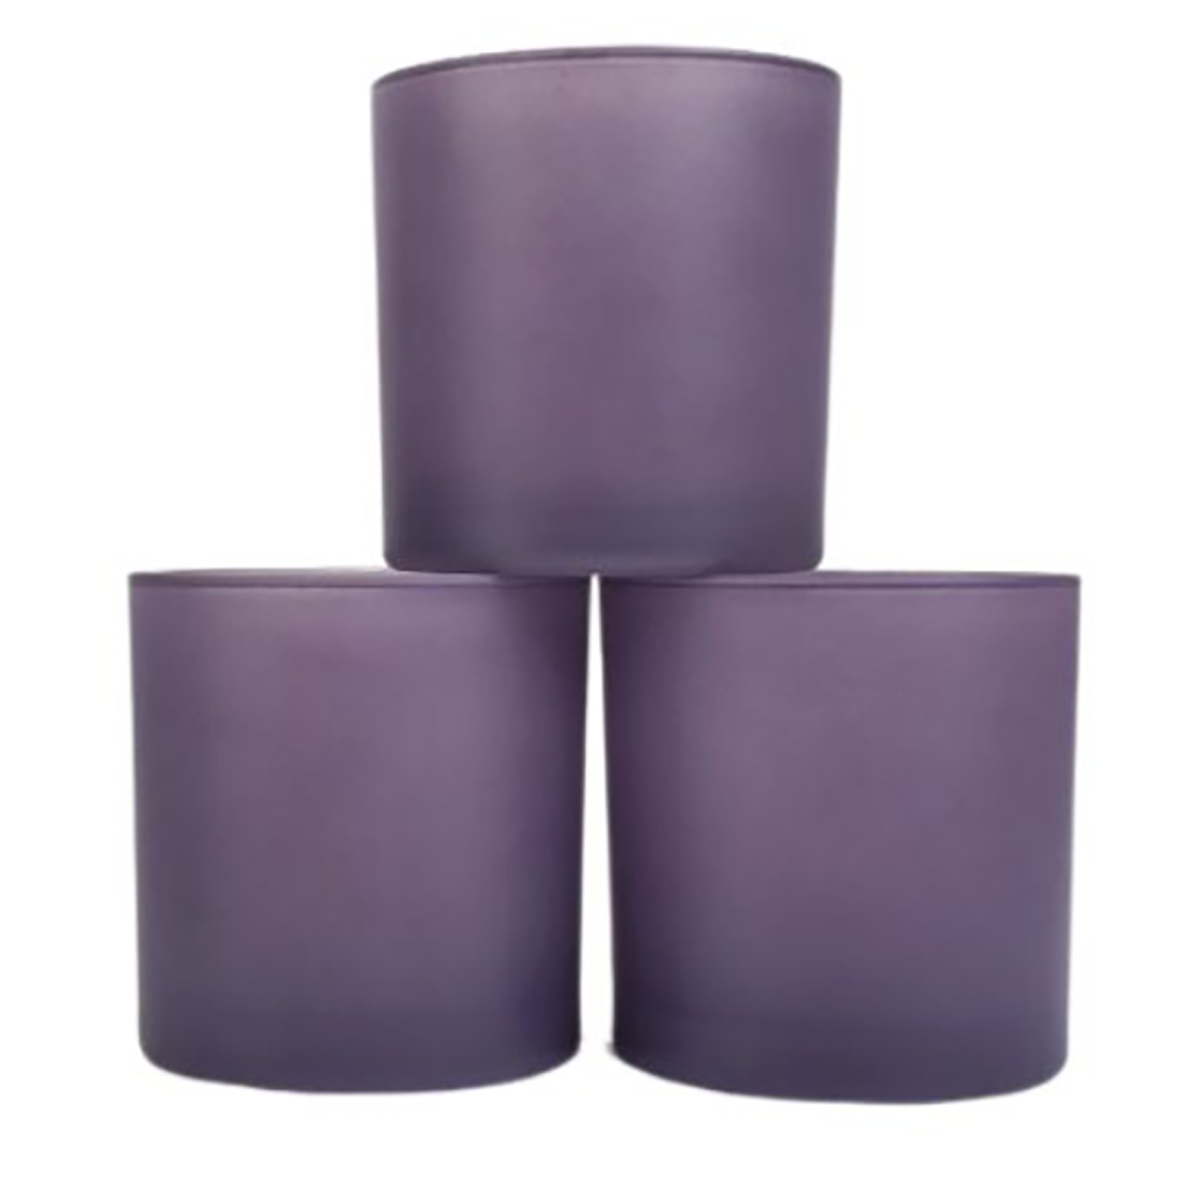 Monticiano candle vessels Frosted Lavender Stacked